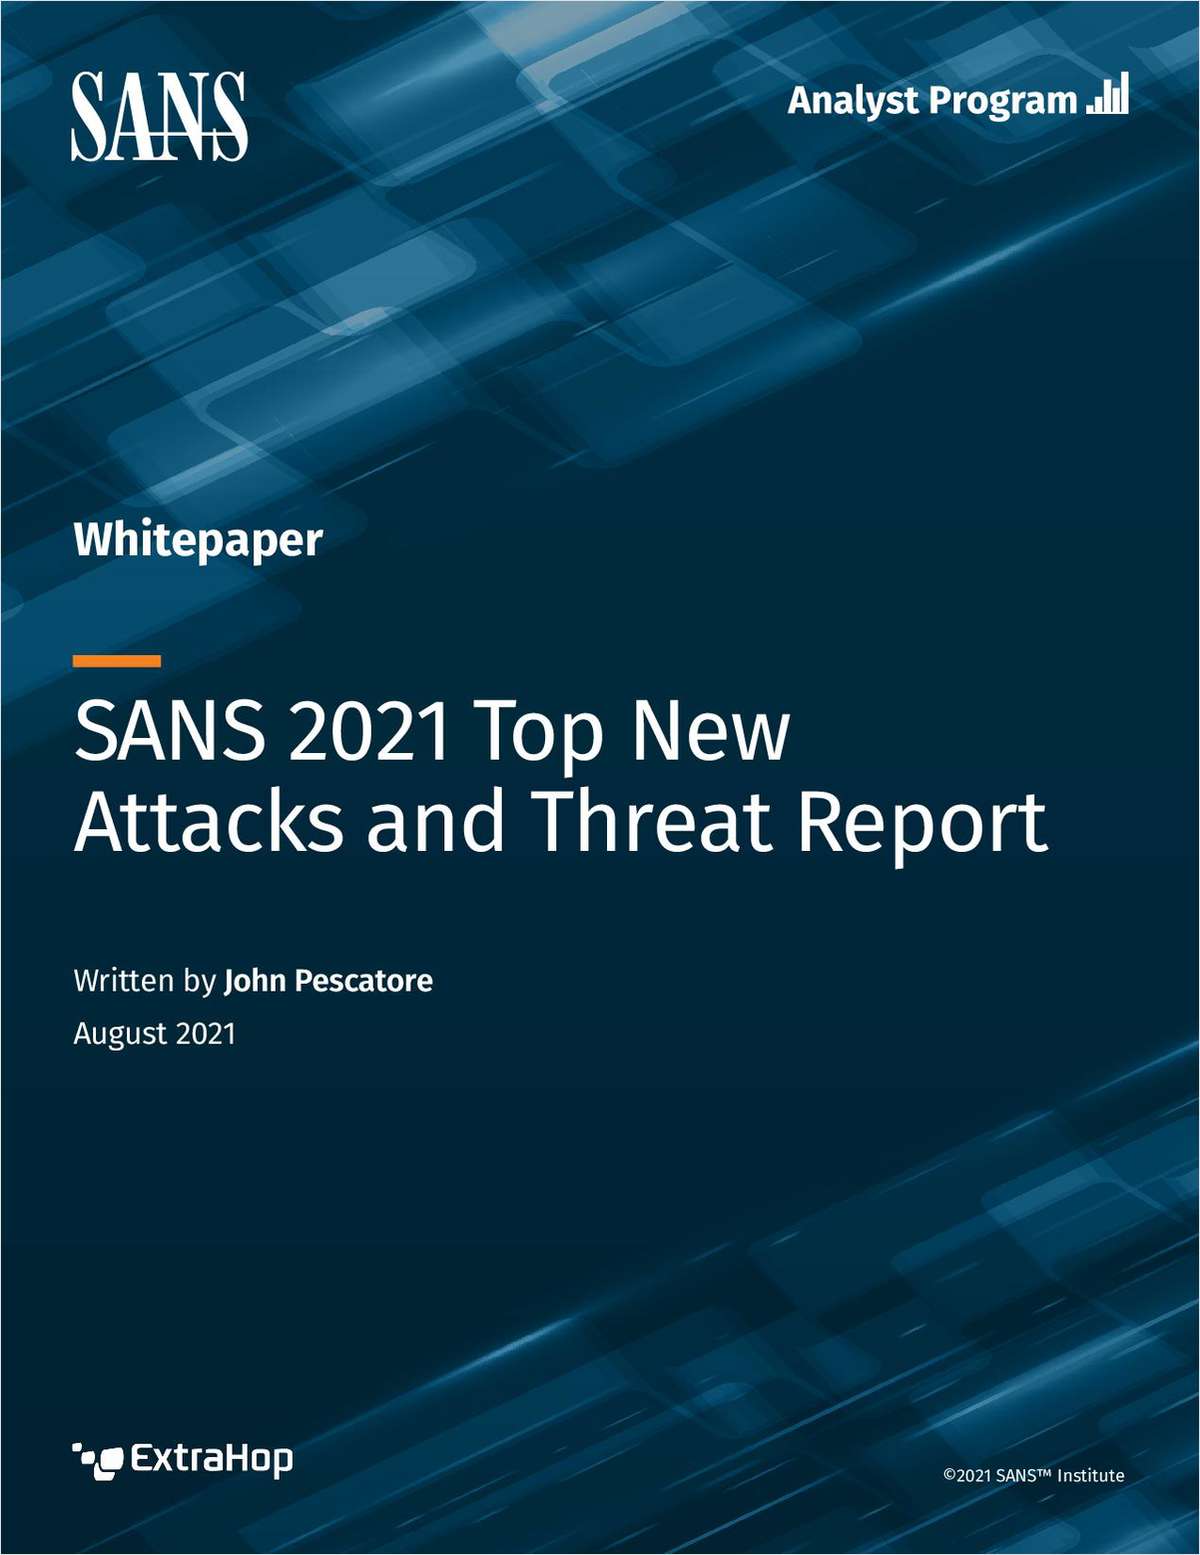 SANS 2021 Top New Attacks and Threat Report